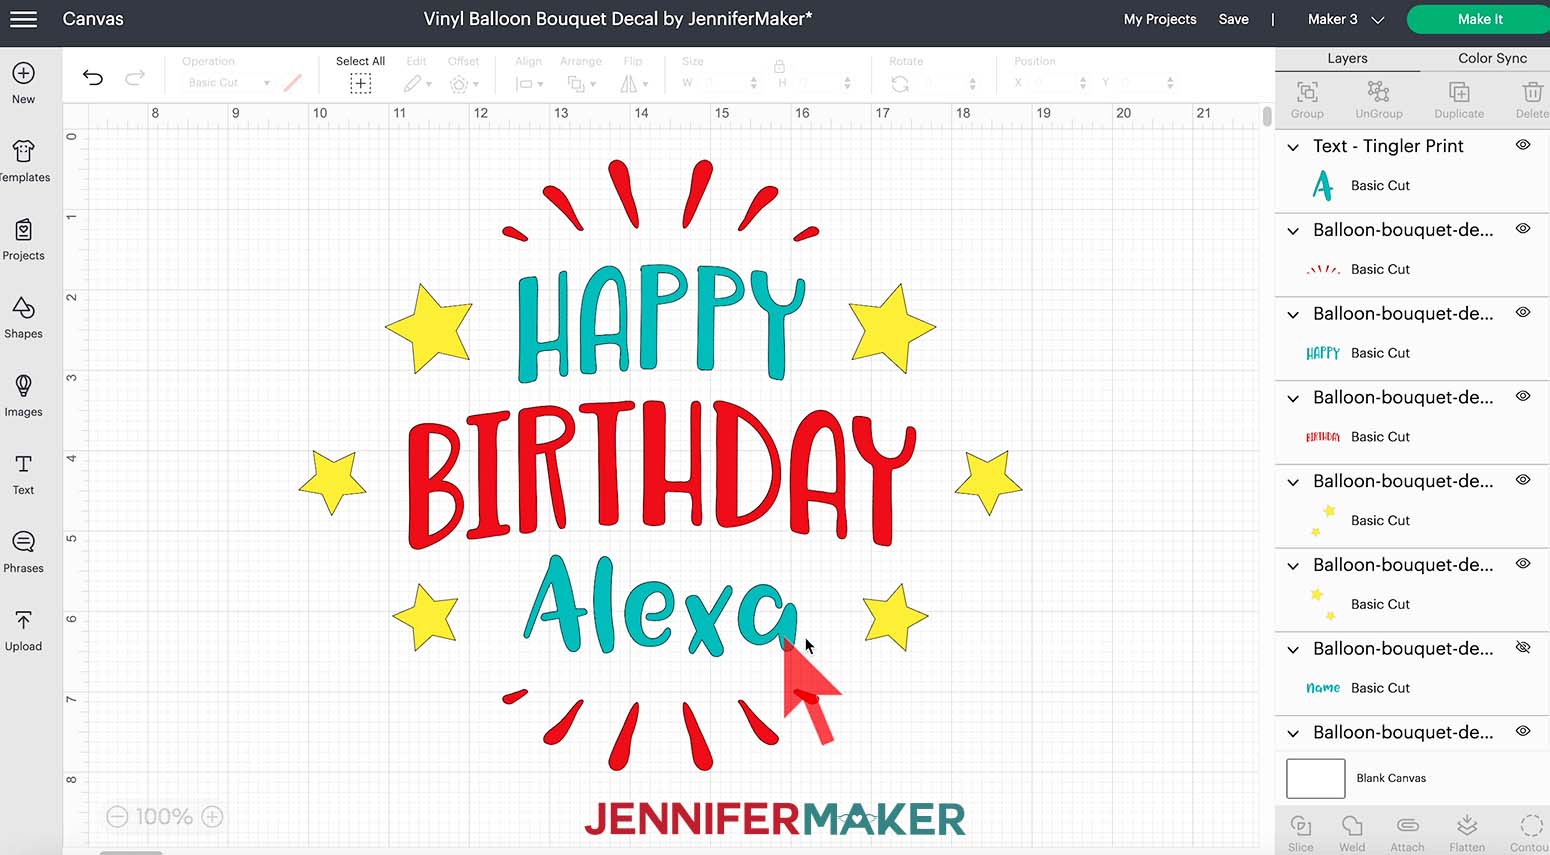 A screenshot of the Design Space Canvas for the vinyl balloon bouquet decal showing the words Happy Birthday Alexa with stars and sparkles surrounding them. The mouse pointer is positioned over the word Alexa.